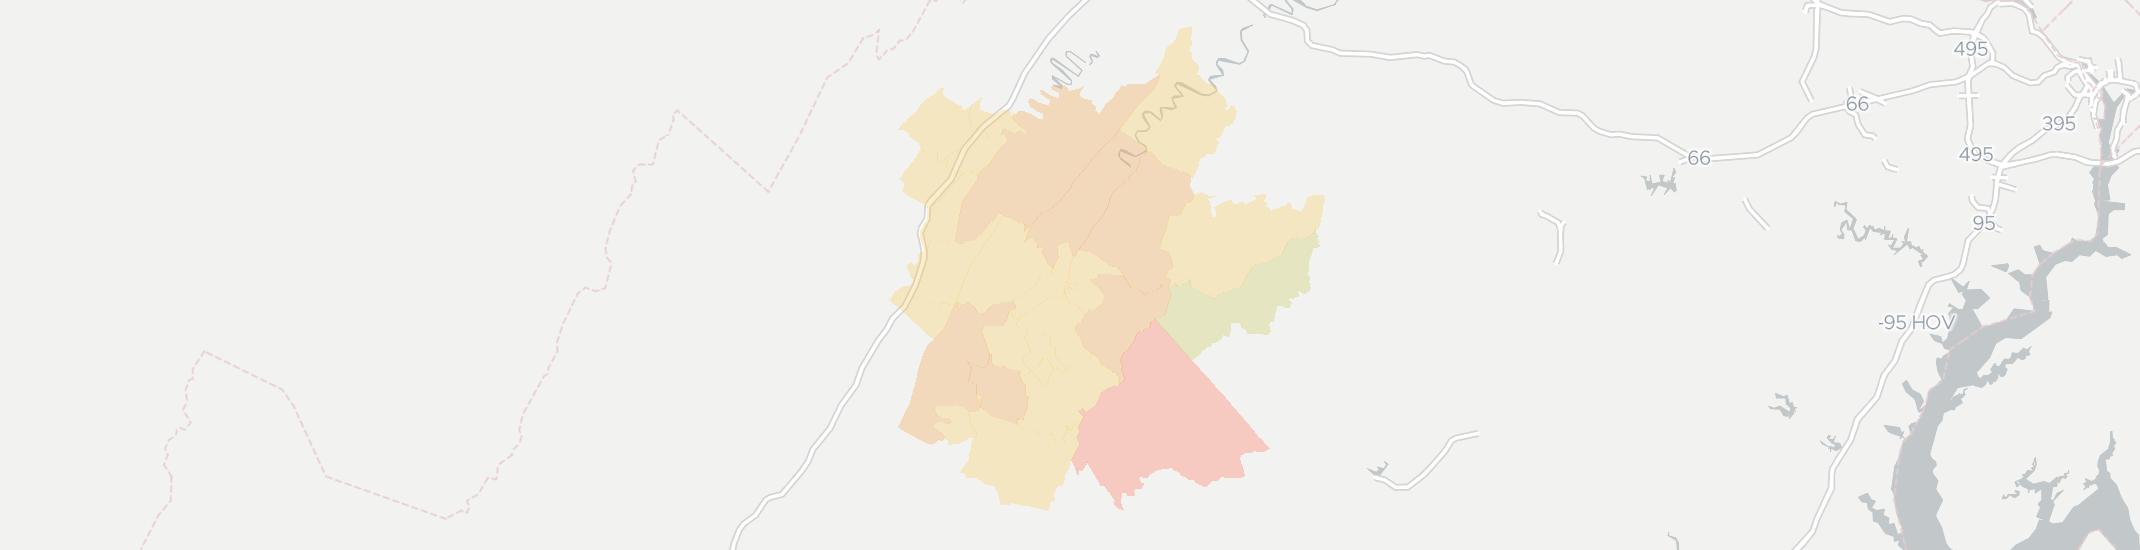 Luray Internet Competition Map. Click for interactive map.